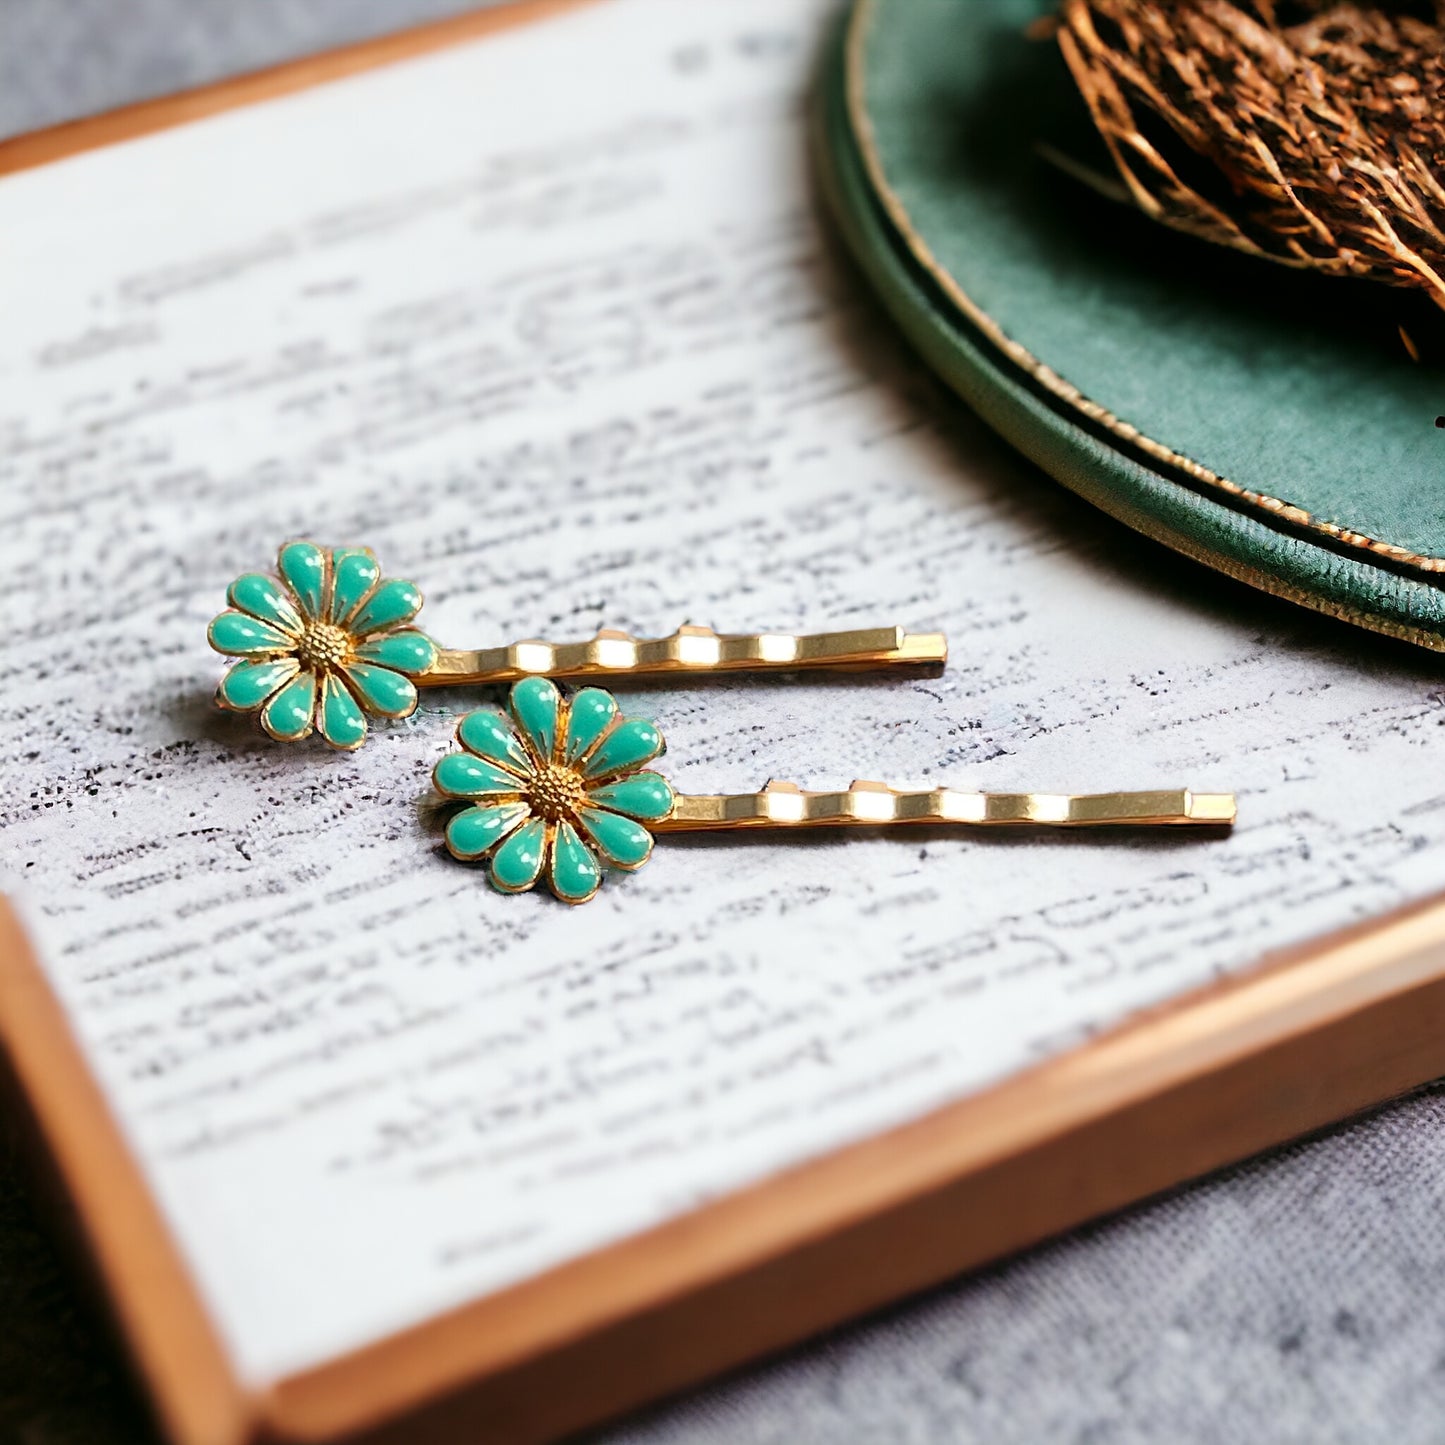 Decorative Mint Green Enamel Wildflower Hair Pins - Delicate Floral Accessories